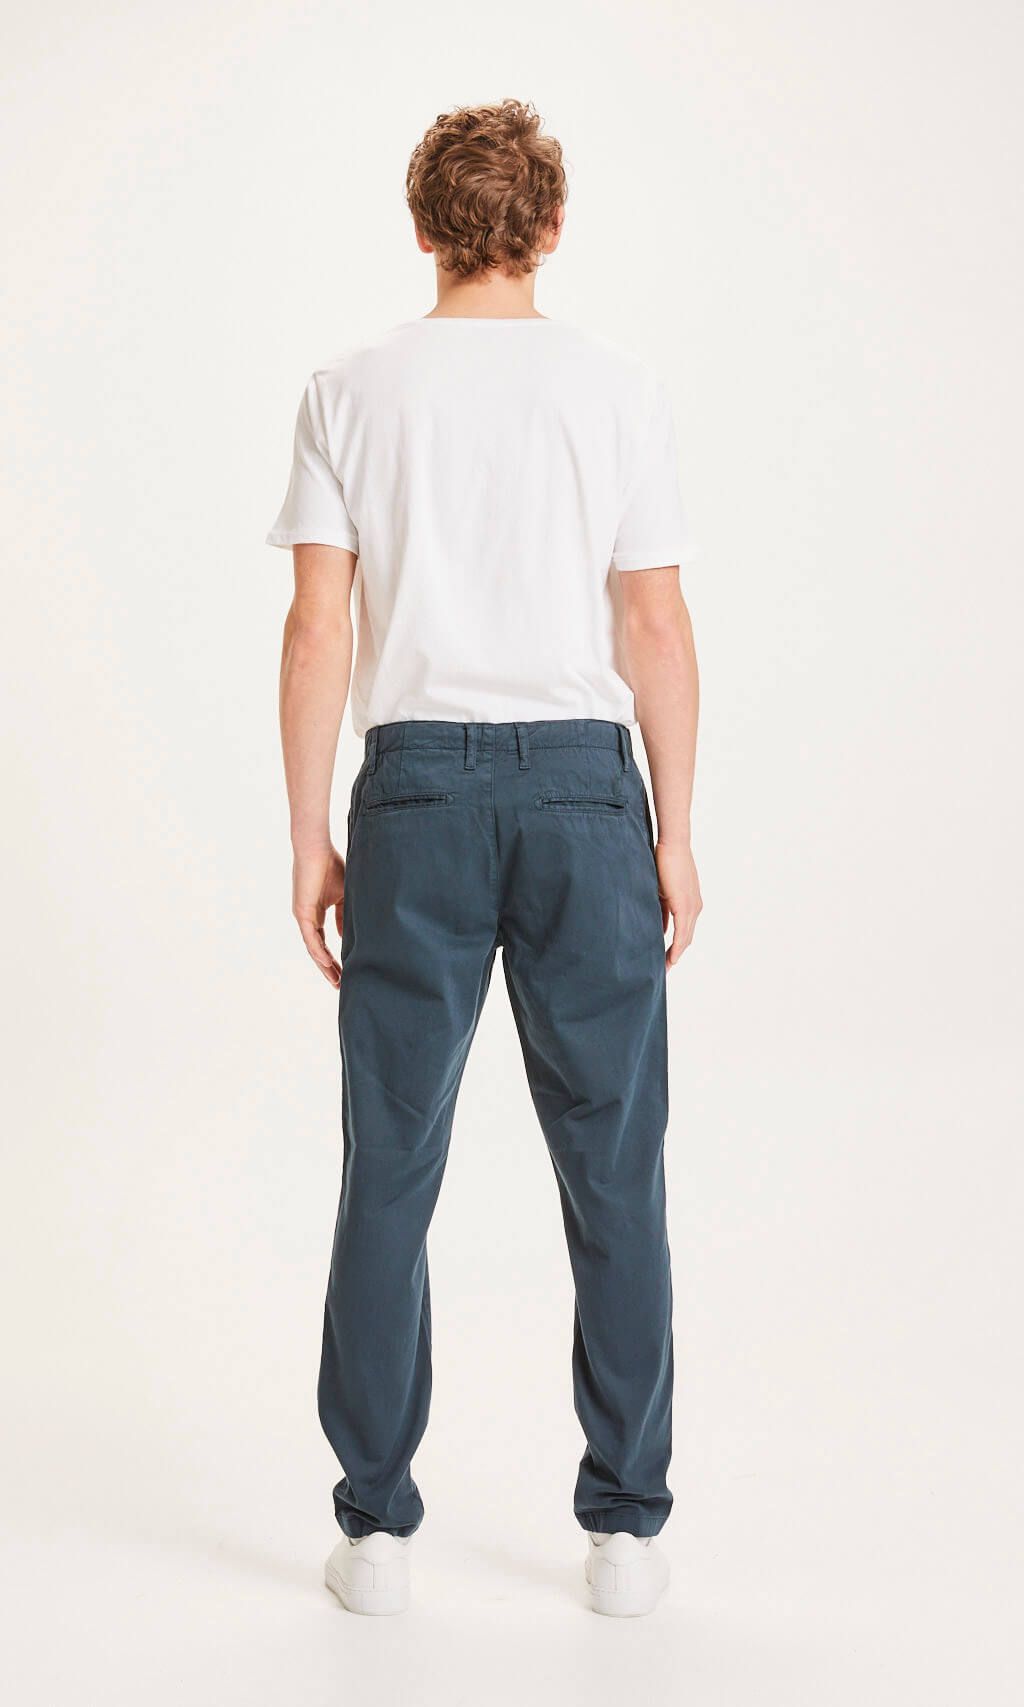 Chuck Regular Stretched Chino Pant Total Eclipse 31/34